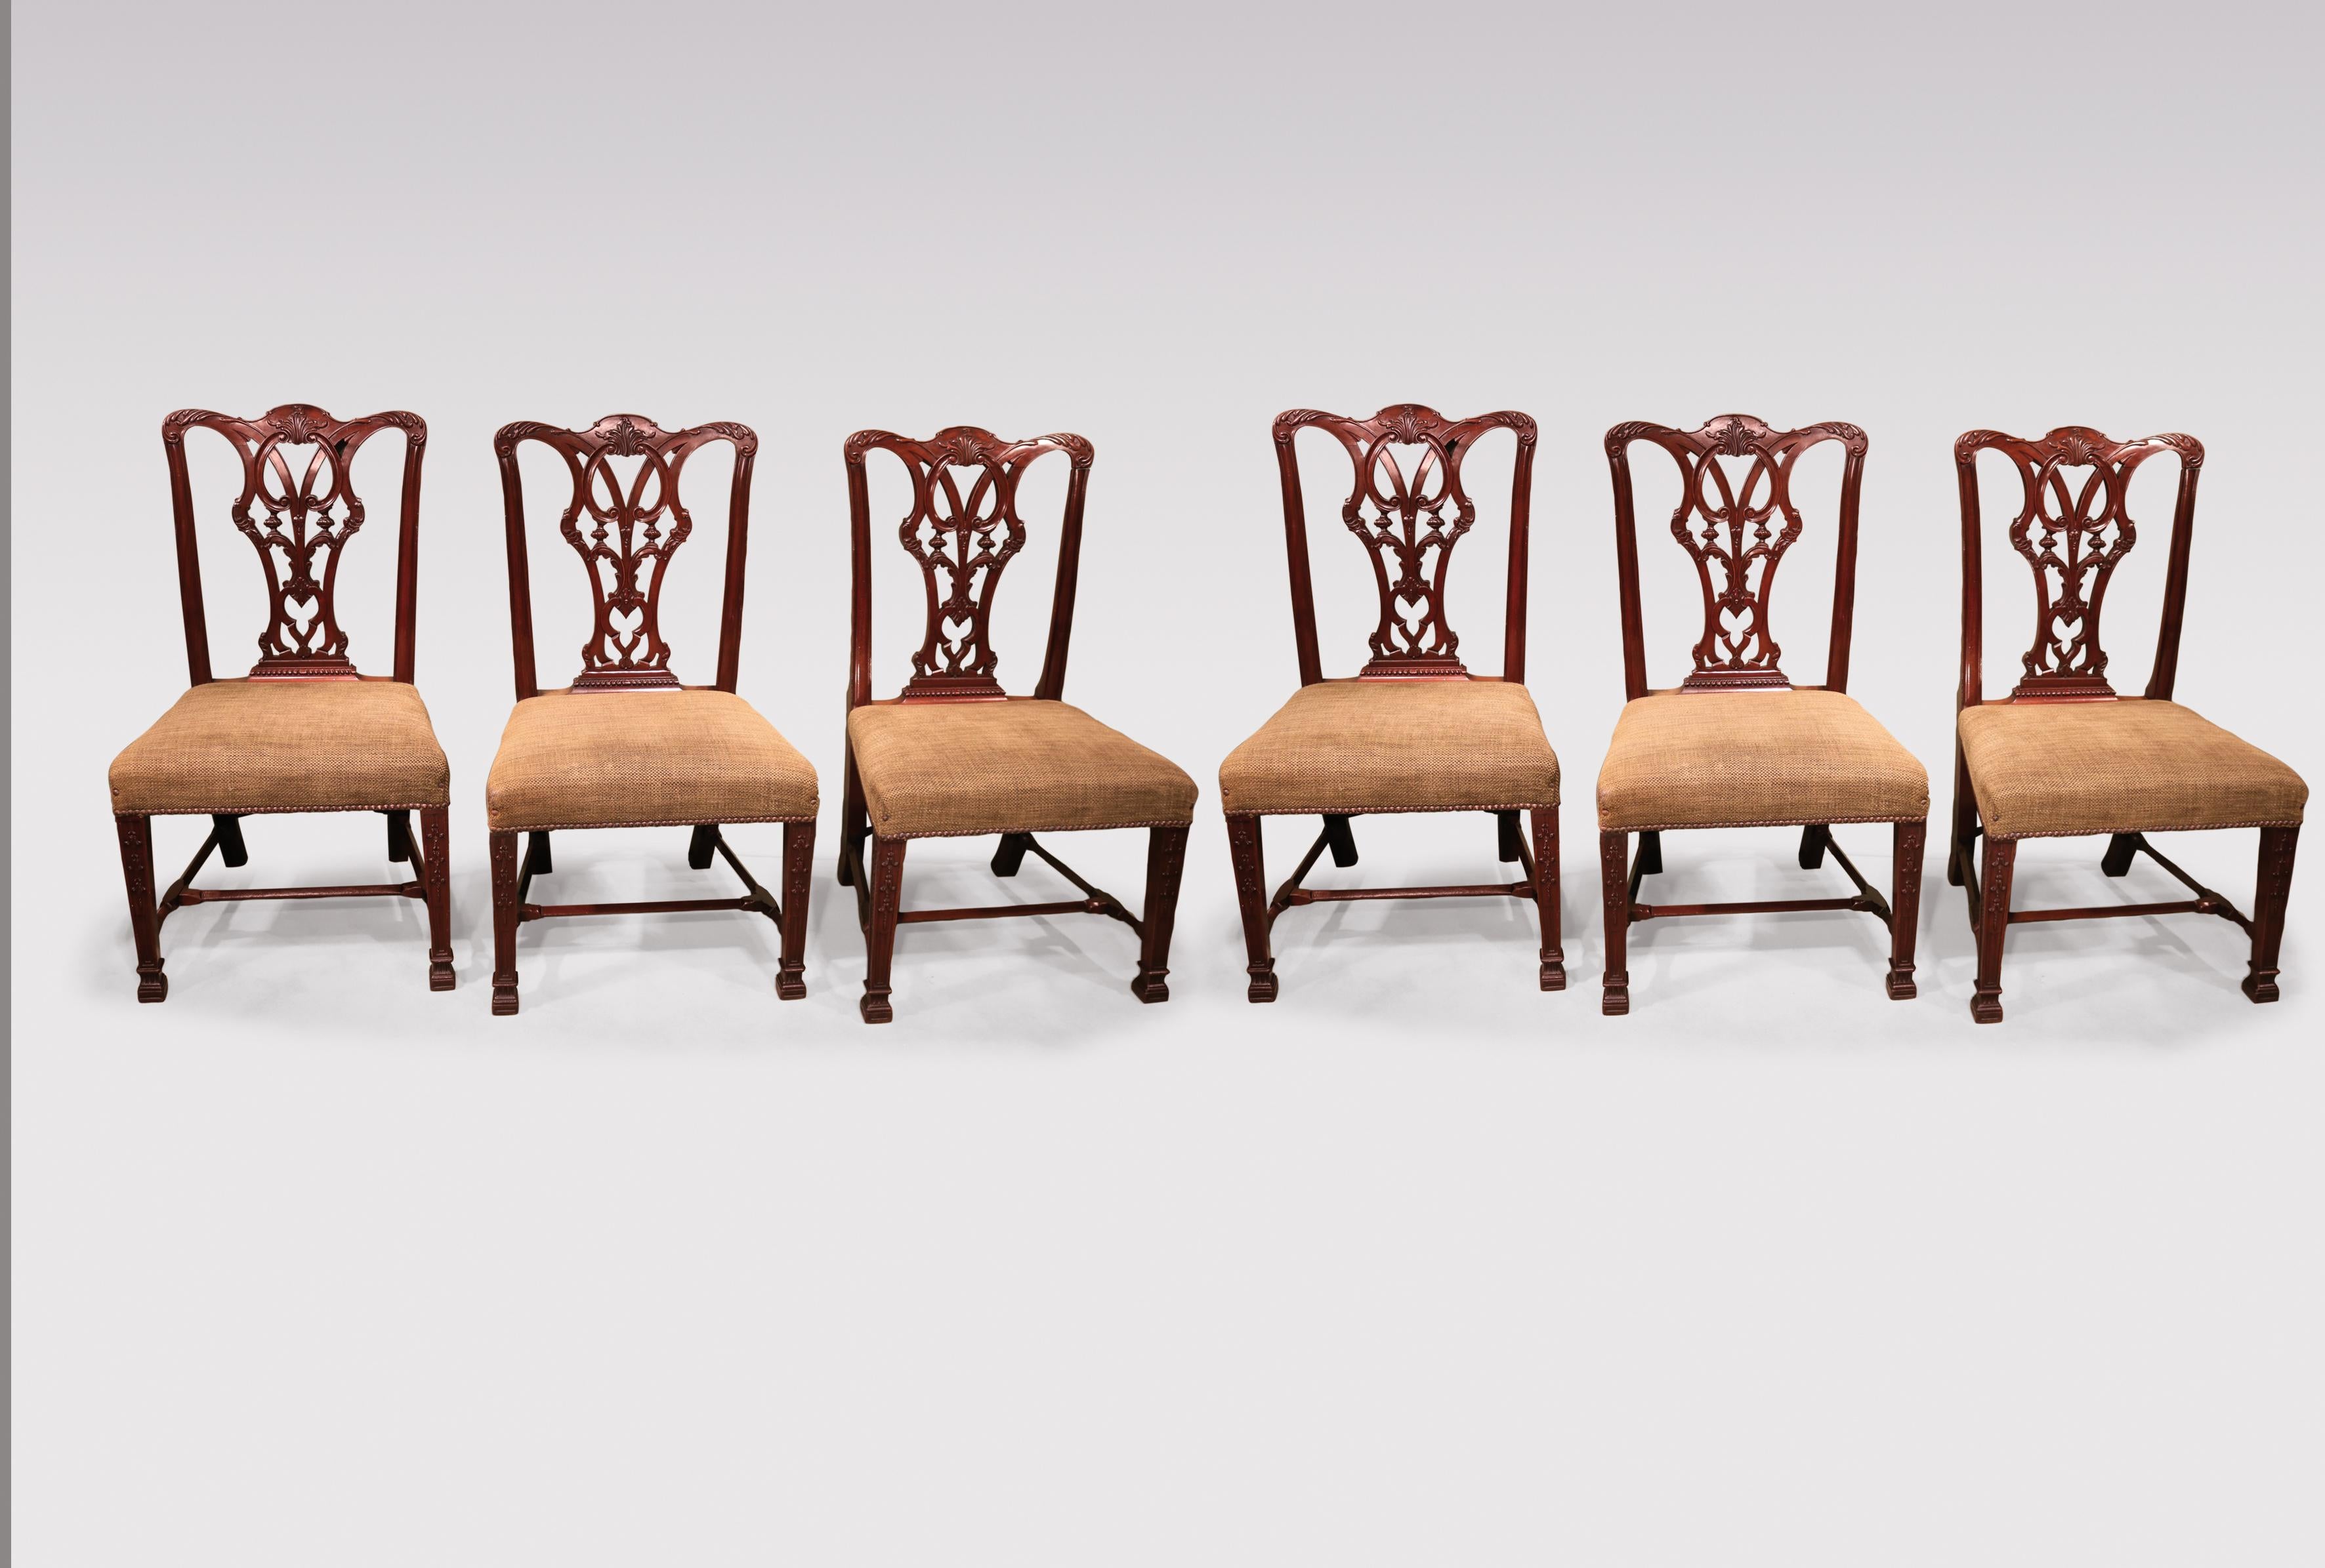 A set of 6 19th Century Chippendale style mahogany dining chairs having acanthus carved top-rails above pierced scrolled splats with vase & gadrooned detail, supported on square tapering legs with inset panels carved with harebell decoration, joined